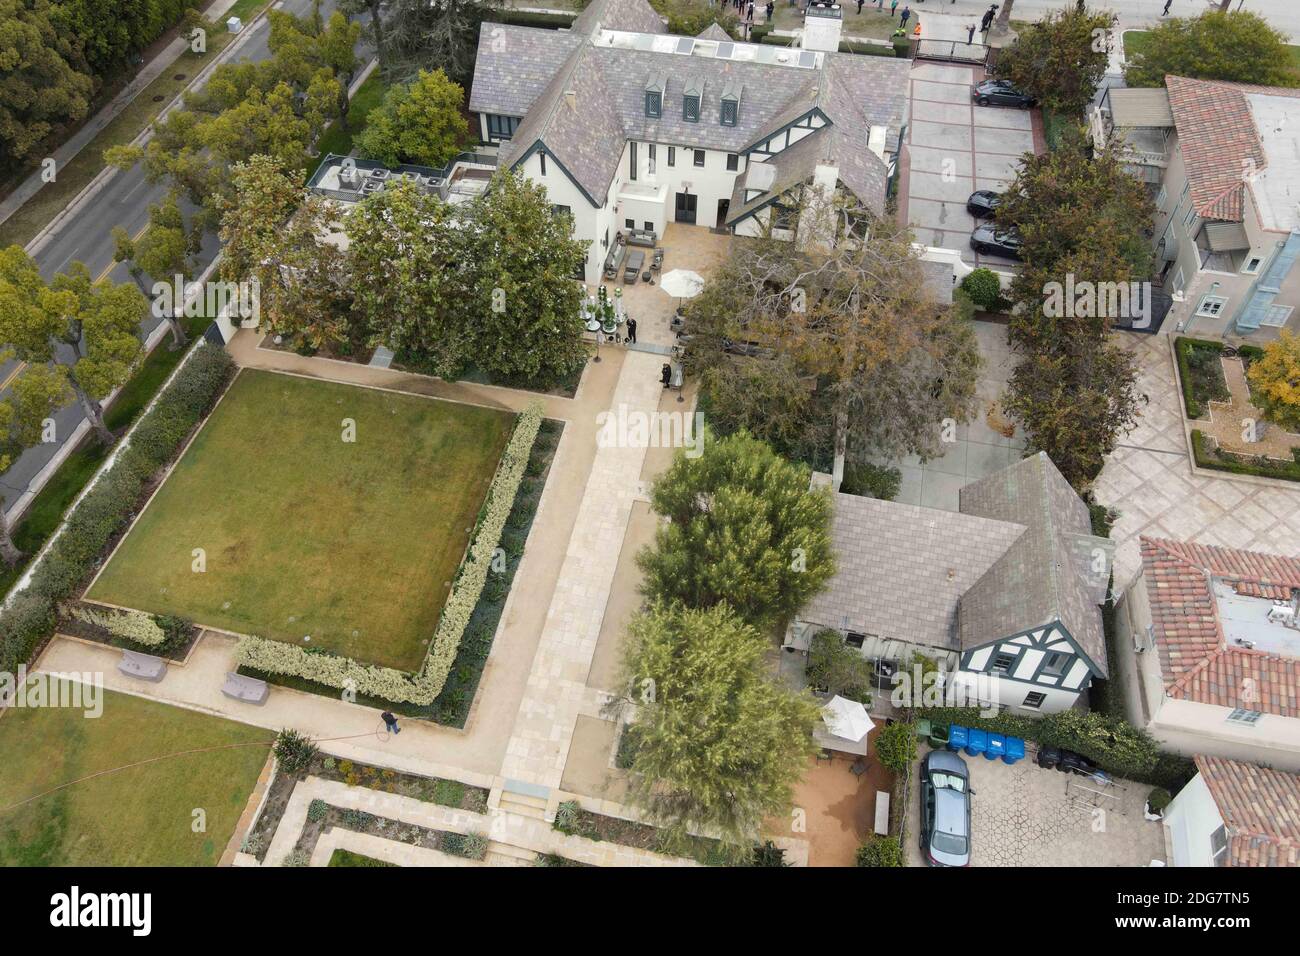 General overall view of the Getty House Foundation located at 601 S Irving, which serves as the home of Los Angeles Mayor Eric Garcetti. Monday, Decem Stock Photo